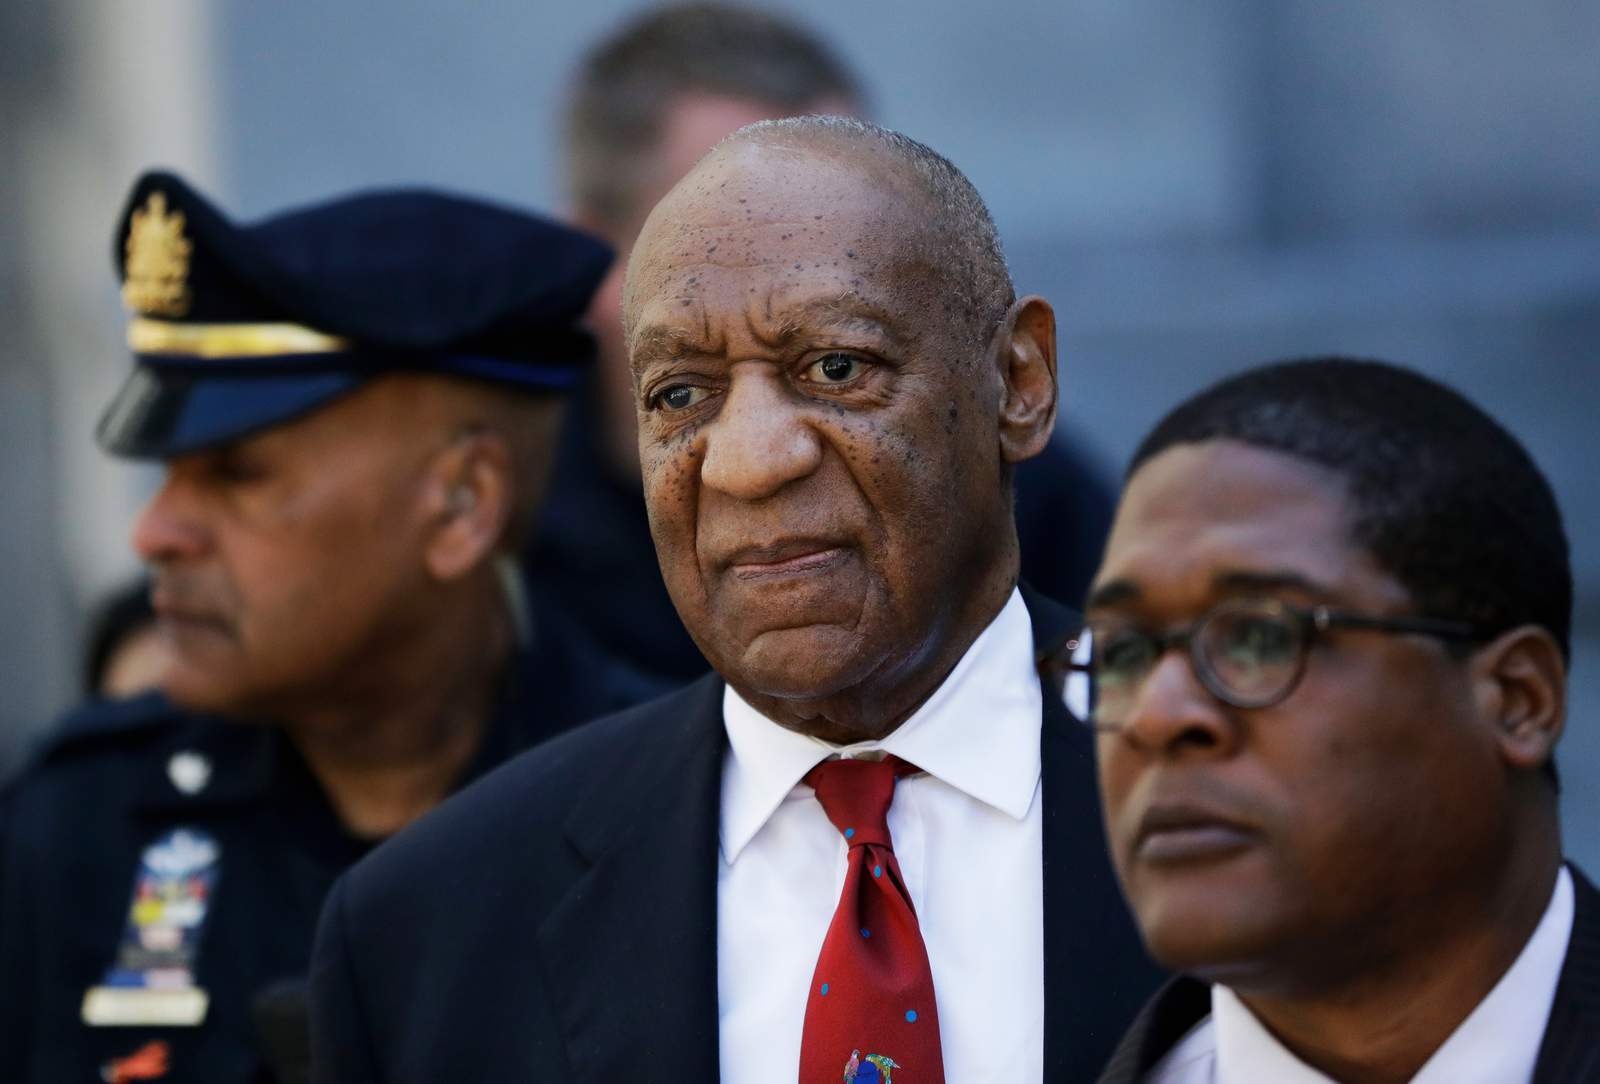 Cosby's sex assault conviction goes before high-level court